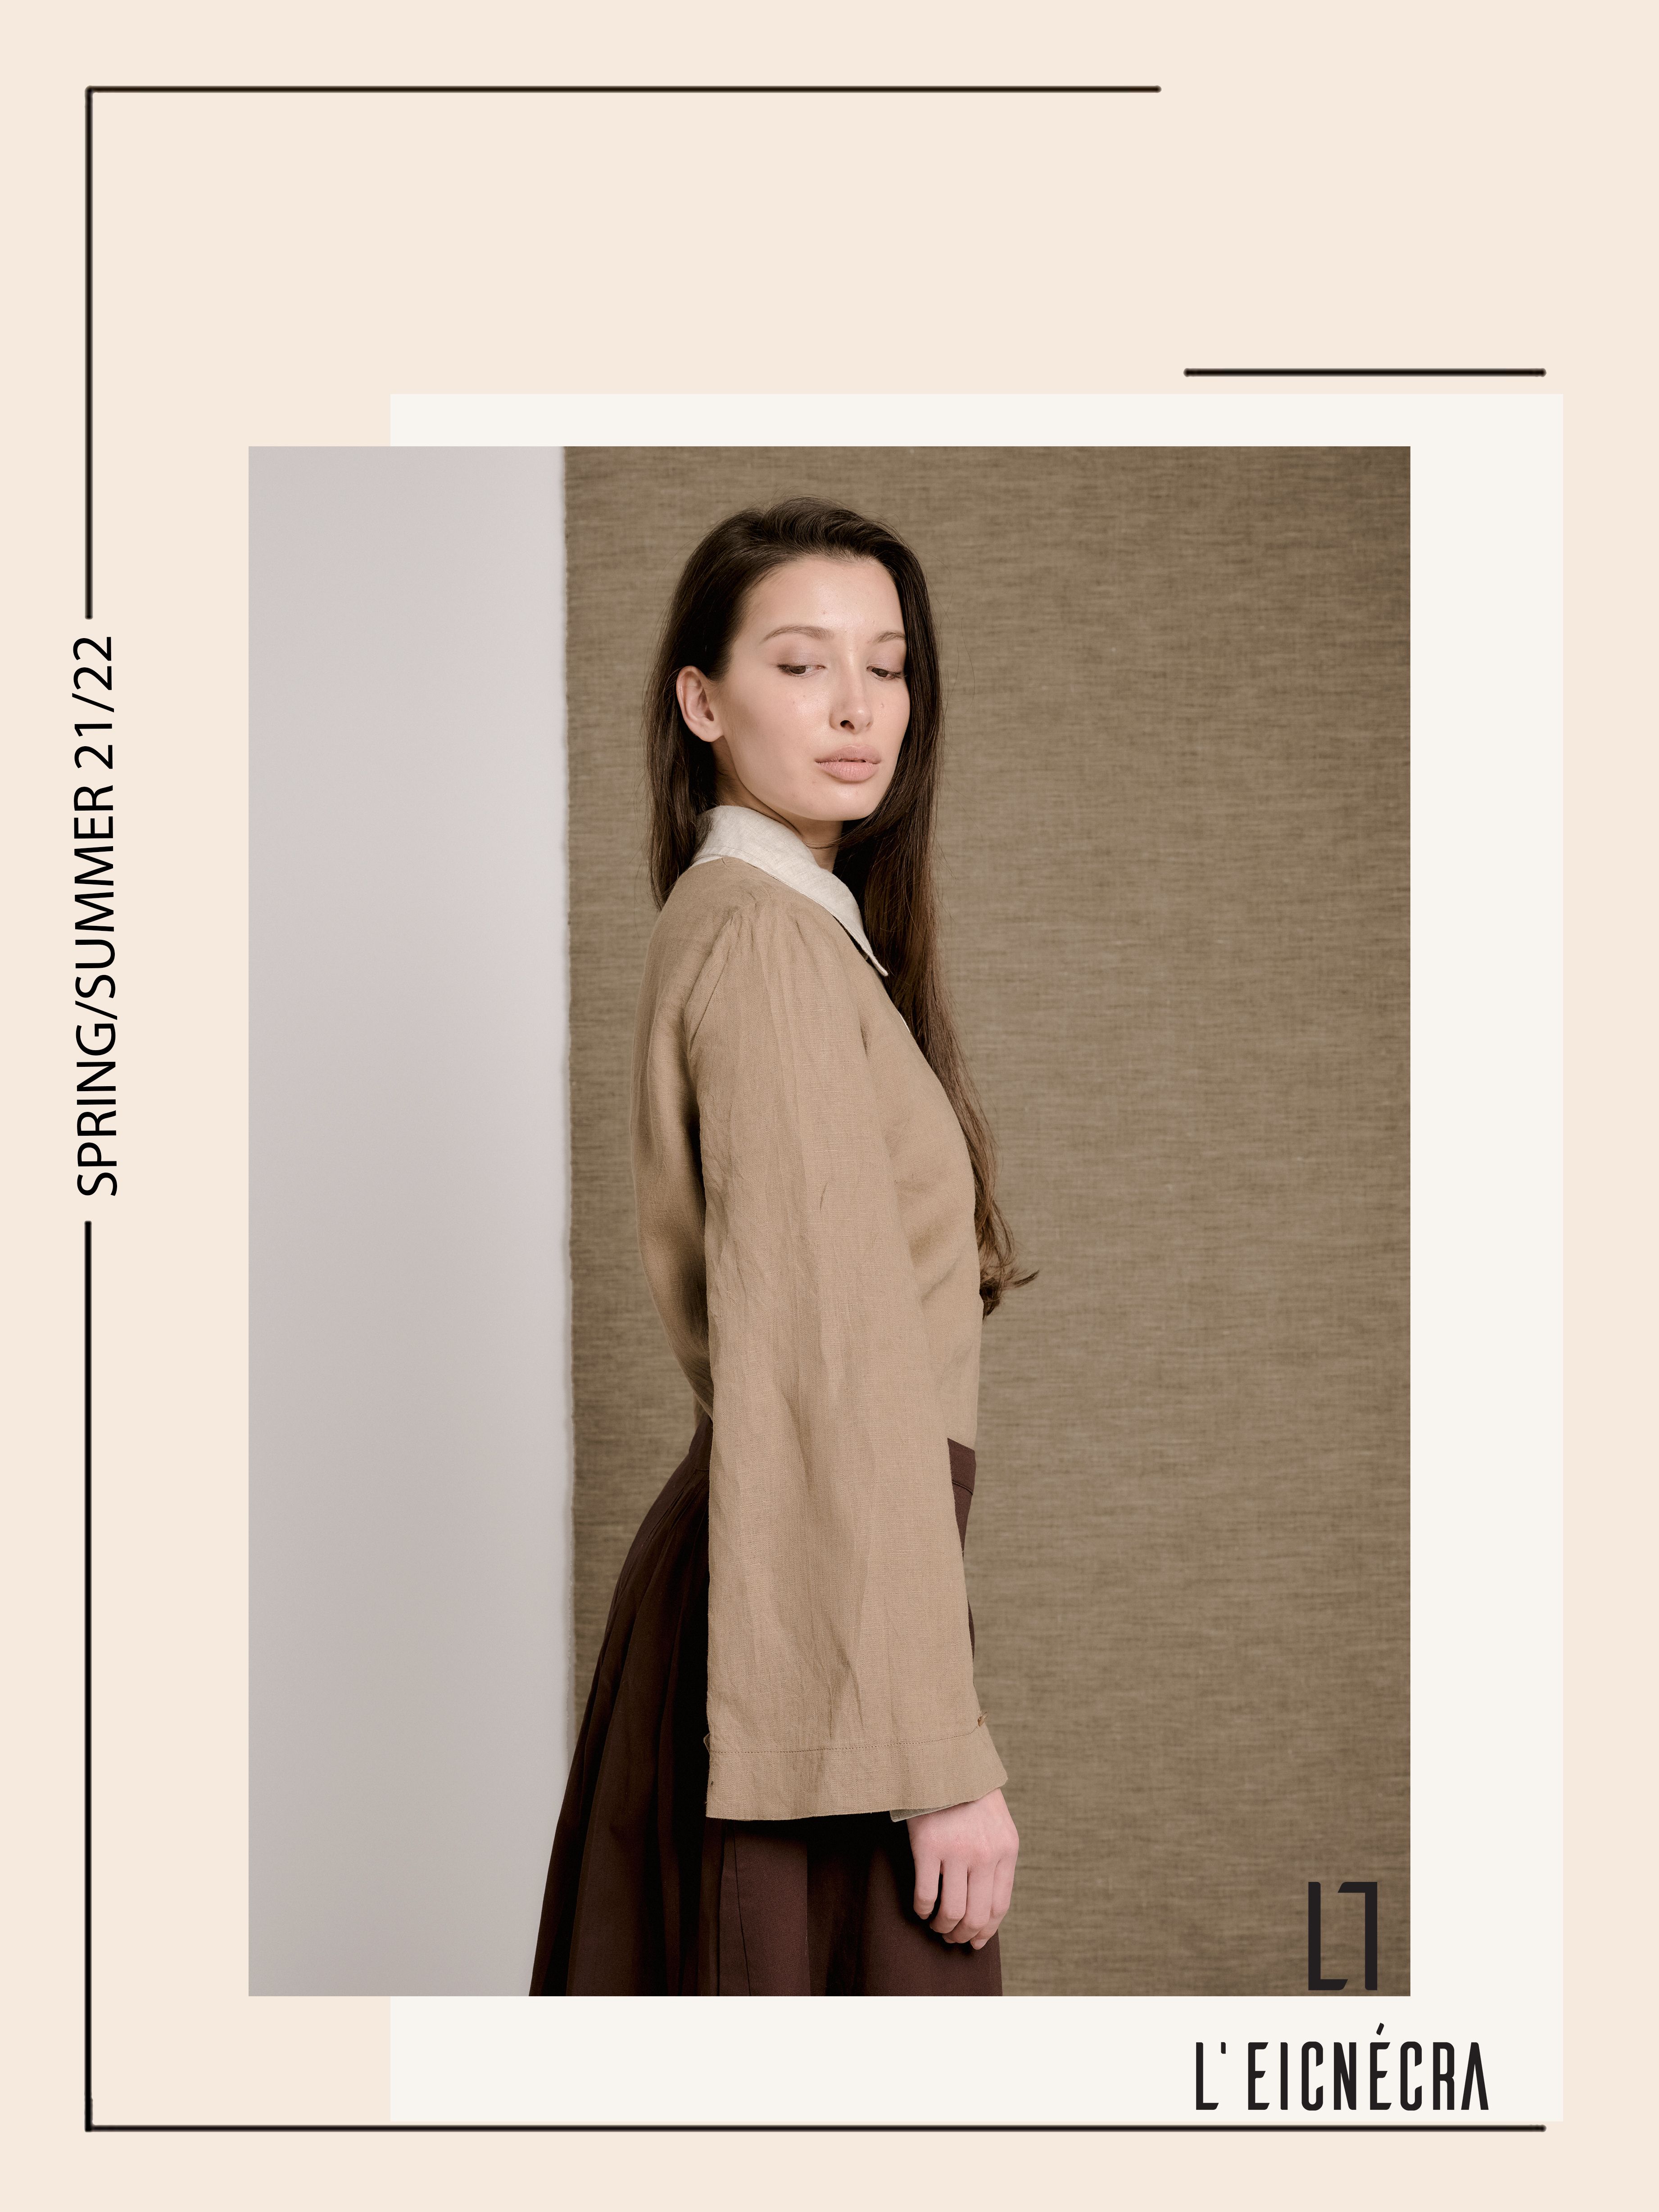 L'EICNÉCRA is ready to introduce their SS 21/22 collection